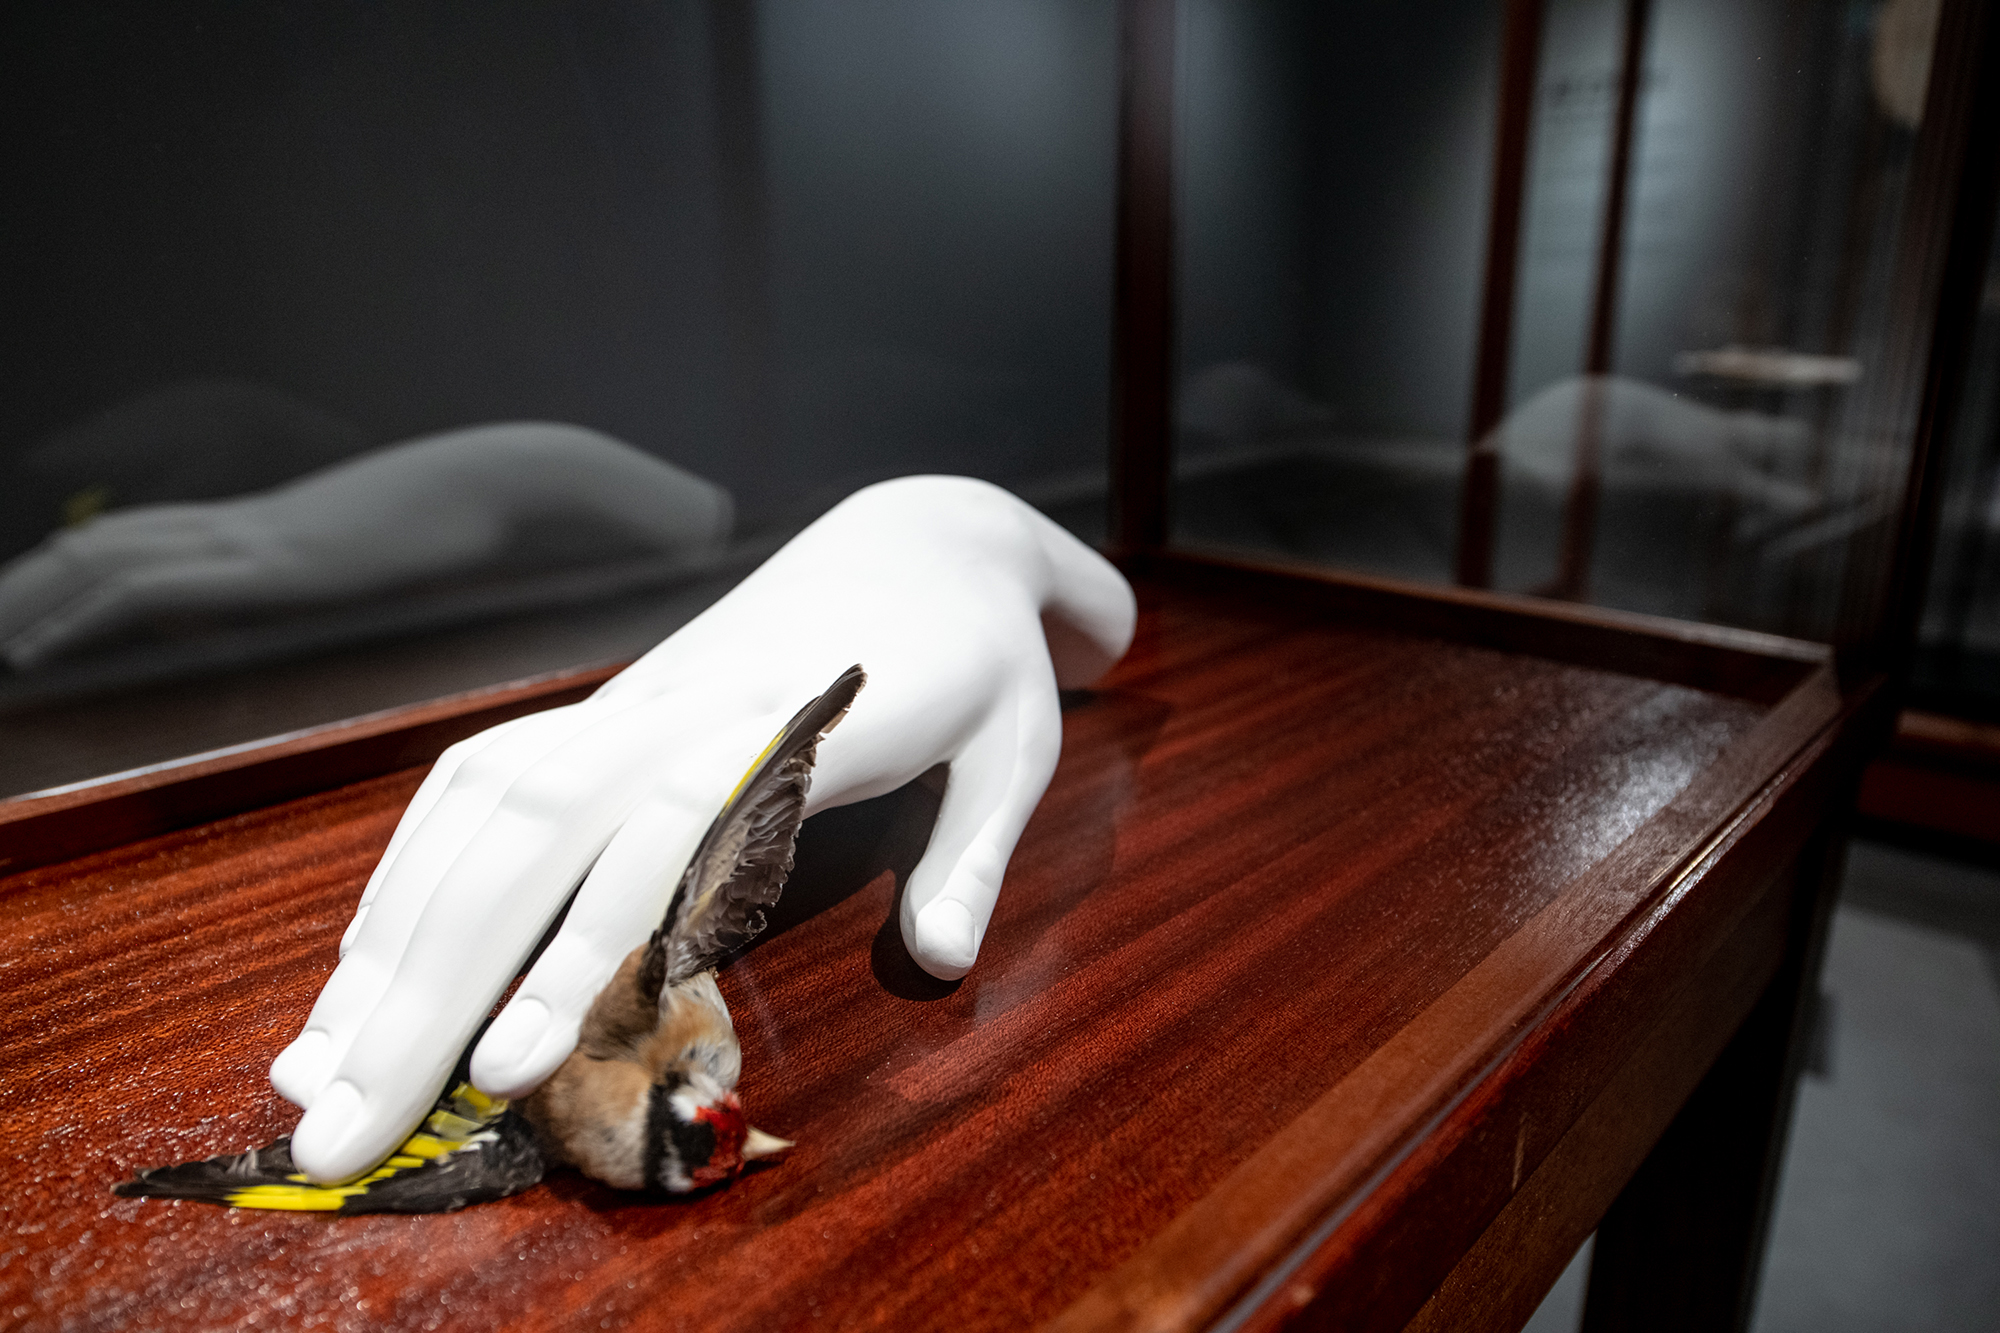 The Madonna of the Cat, after Barocci (2022) by Ali Cherri - a sculpture of a white, Classical-style hand pressing down on a taxidermied goldfinch, positioned as if trying to escape. The sculpture is contained within a wood and glass cabinet.